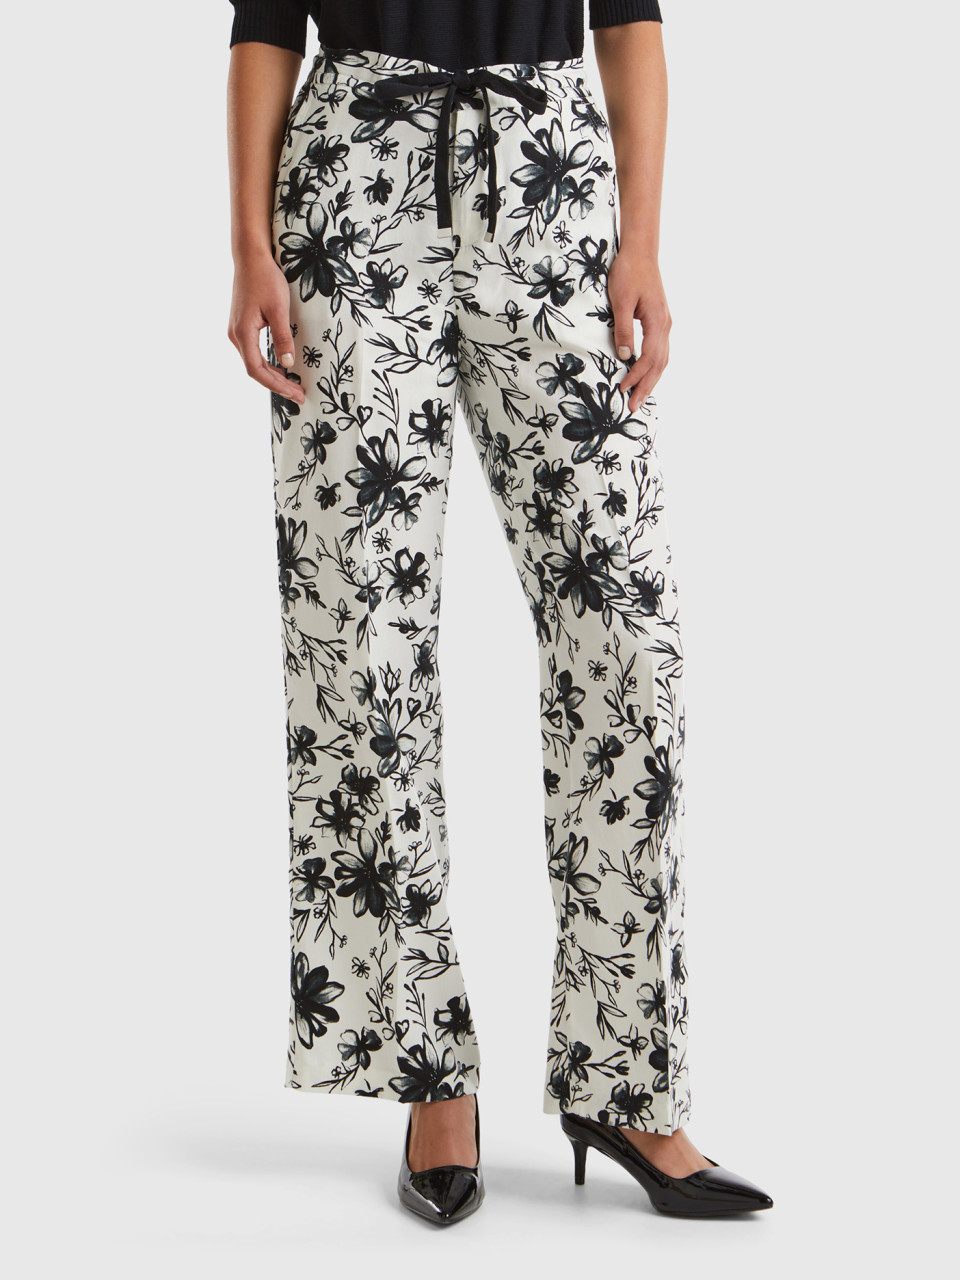 Benetton, Patterned Trousers In Sustainable Viscose, Creamy White, Women